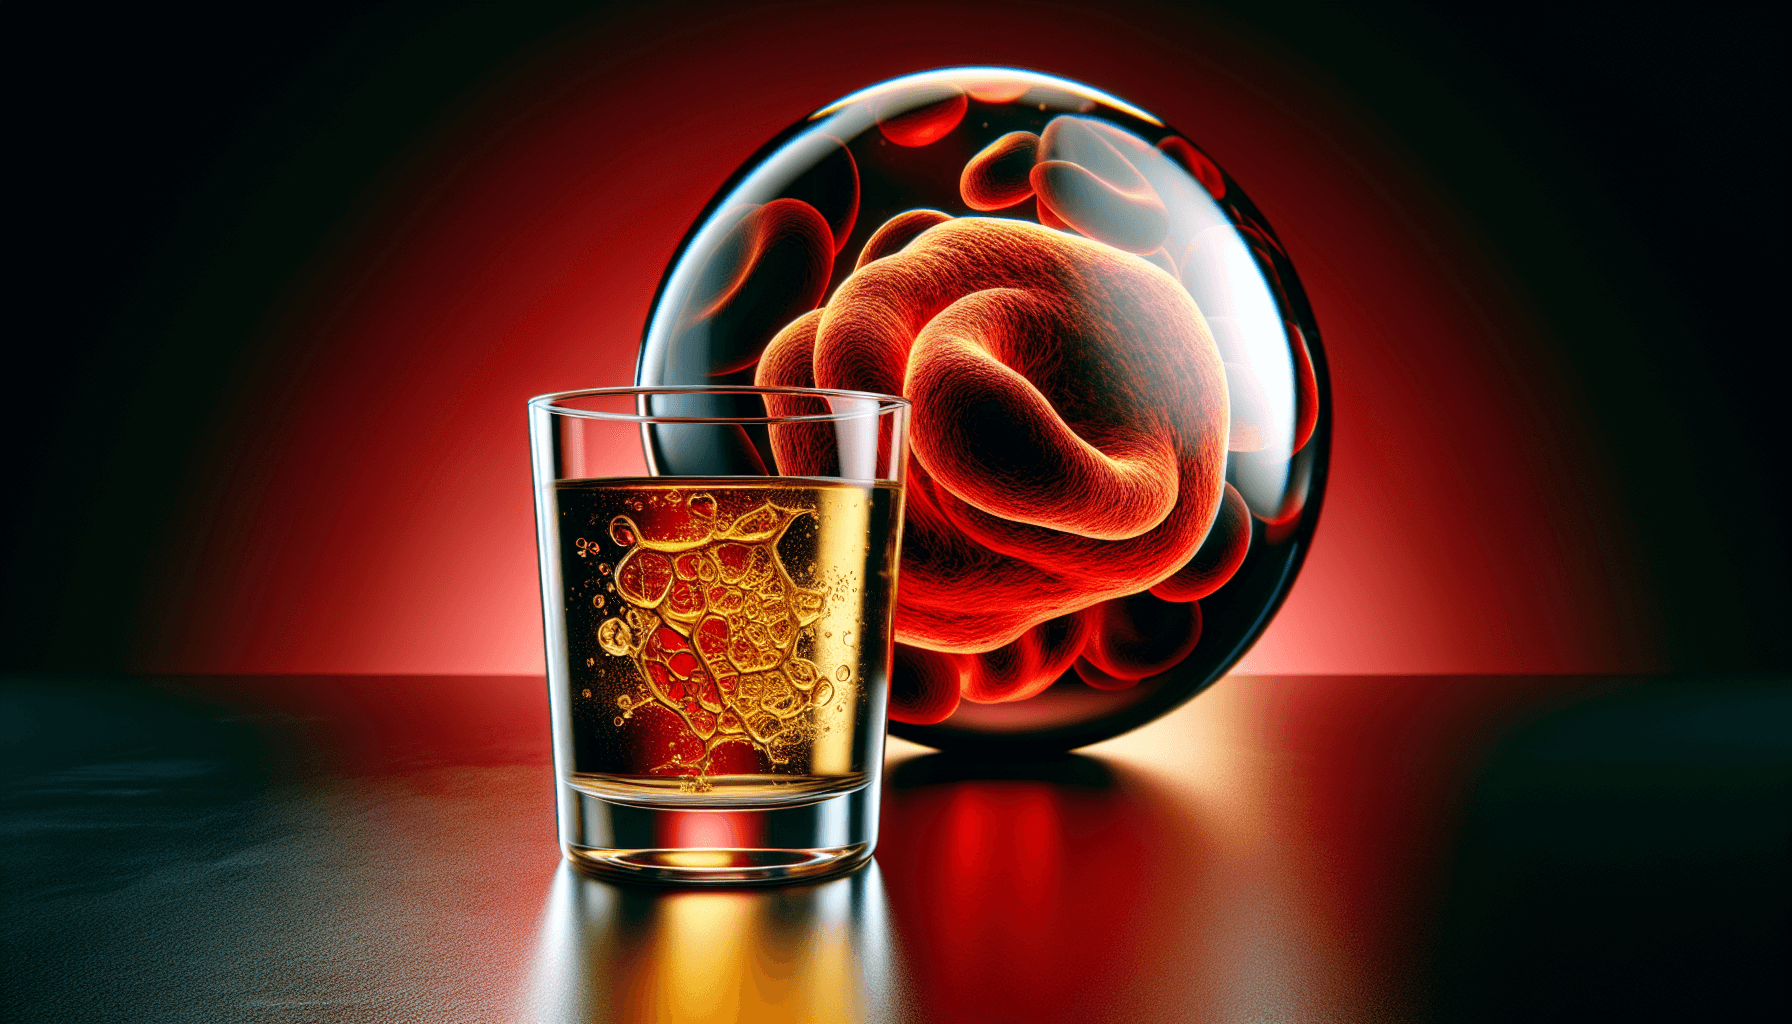 Illustration of a glass of alcohol and a blood clot to represent the impact of alcohol on blood clotting